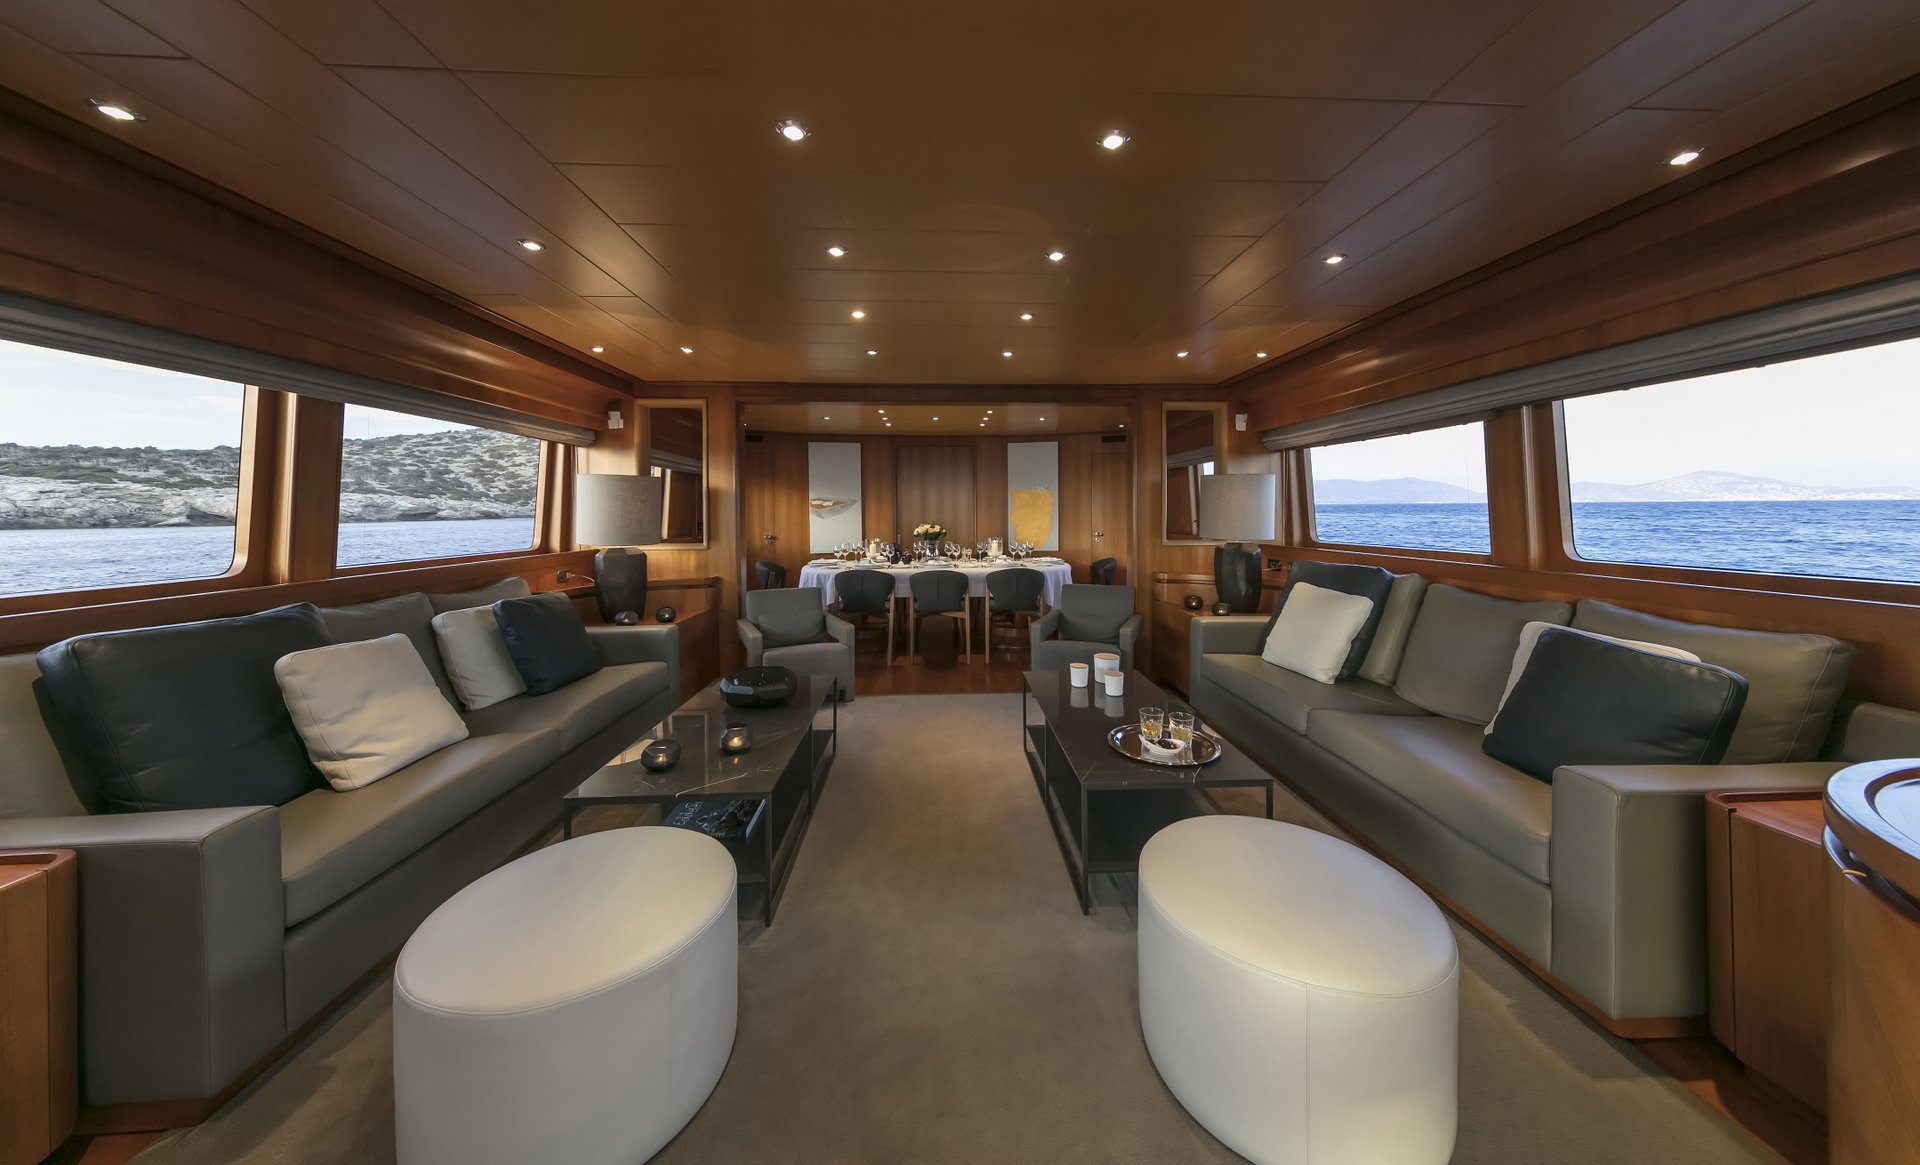 M/Y SUMMER DREAMS yacht for charter lounge